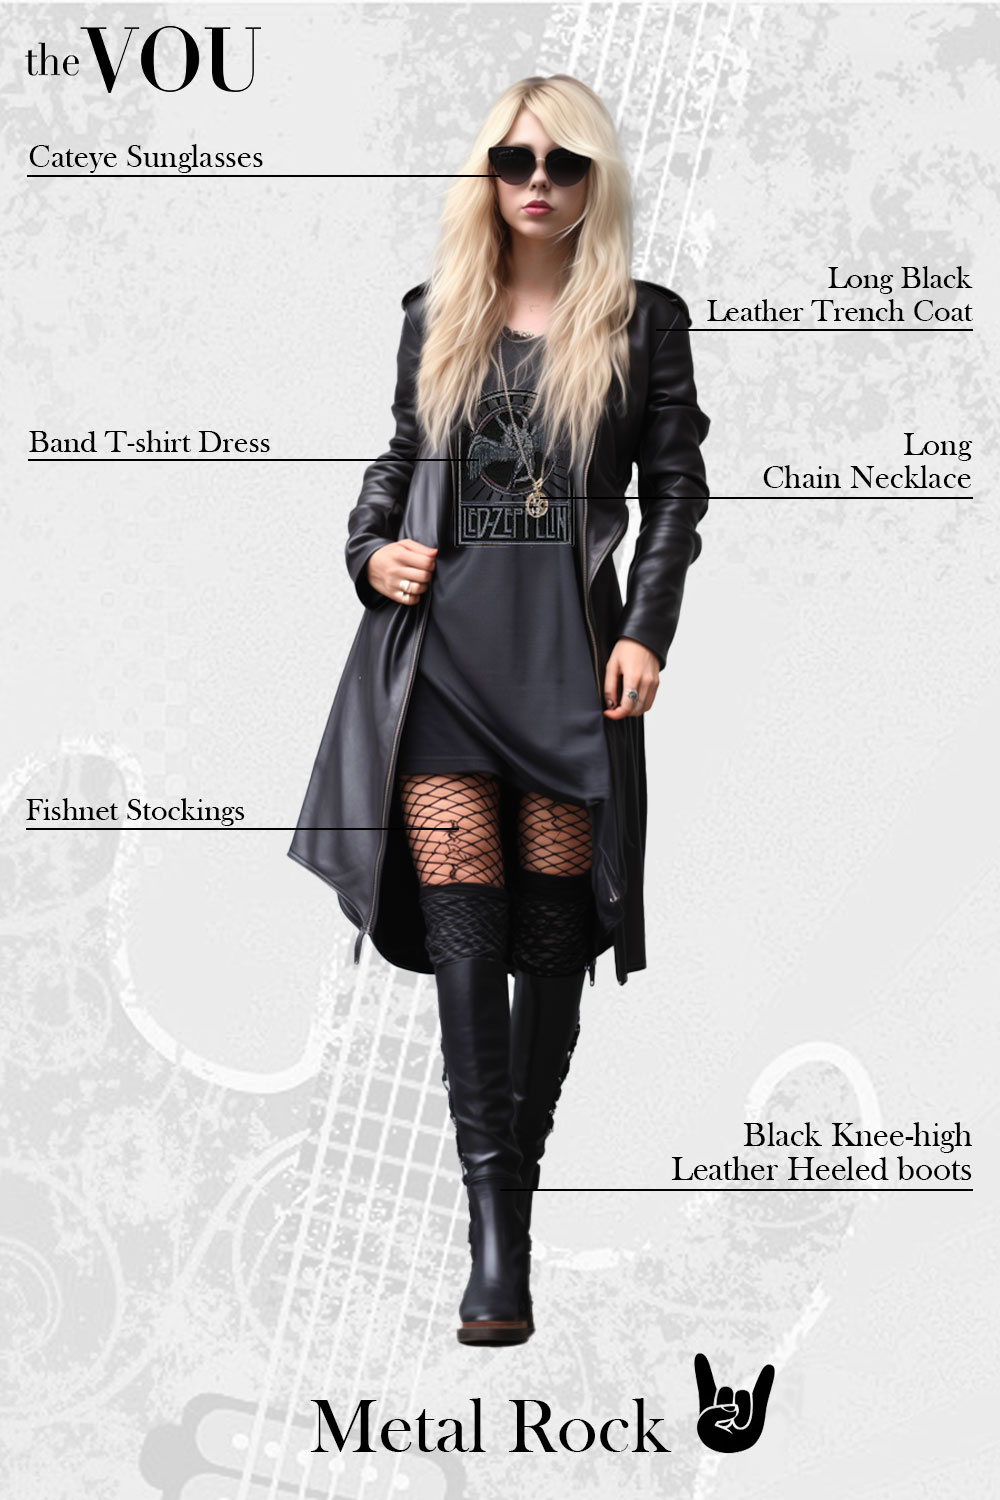 Metal Rock fashion style outfit